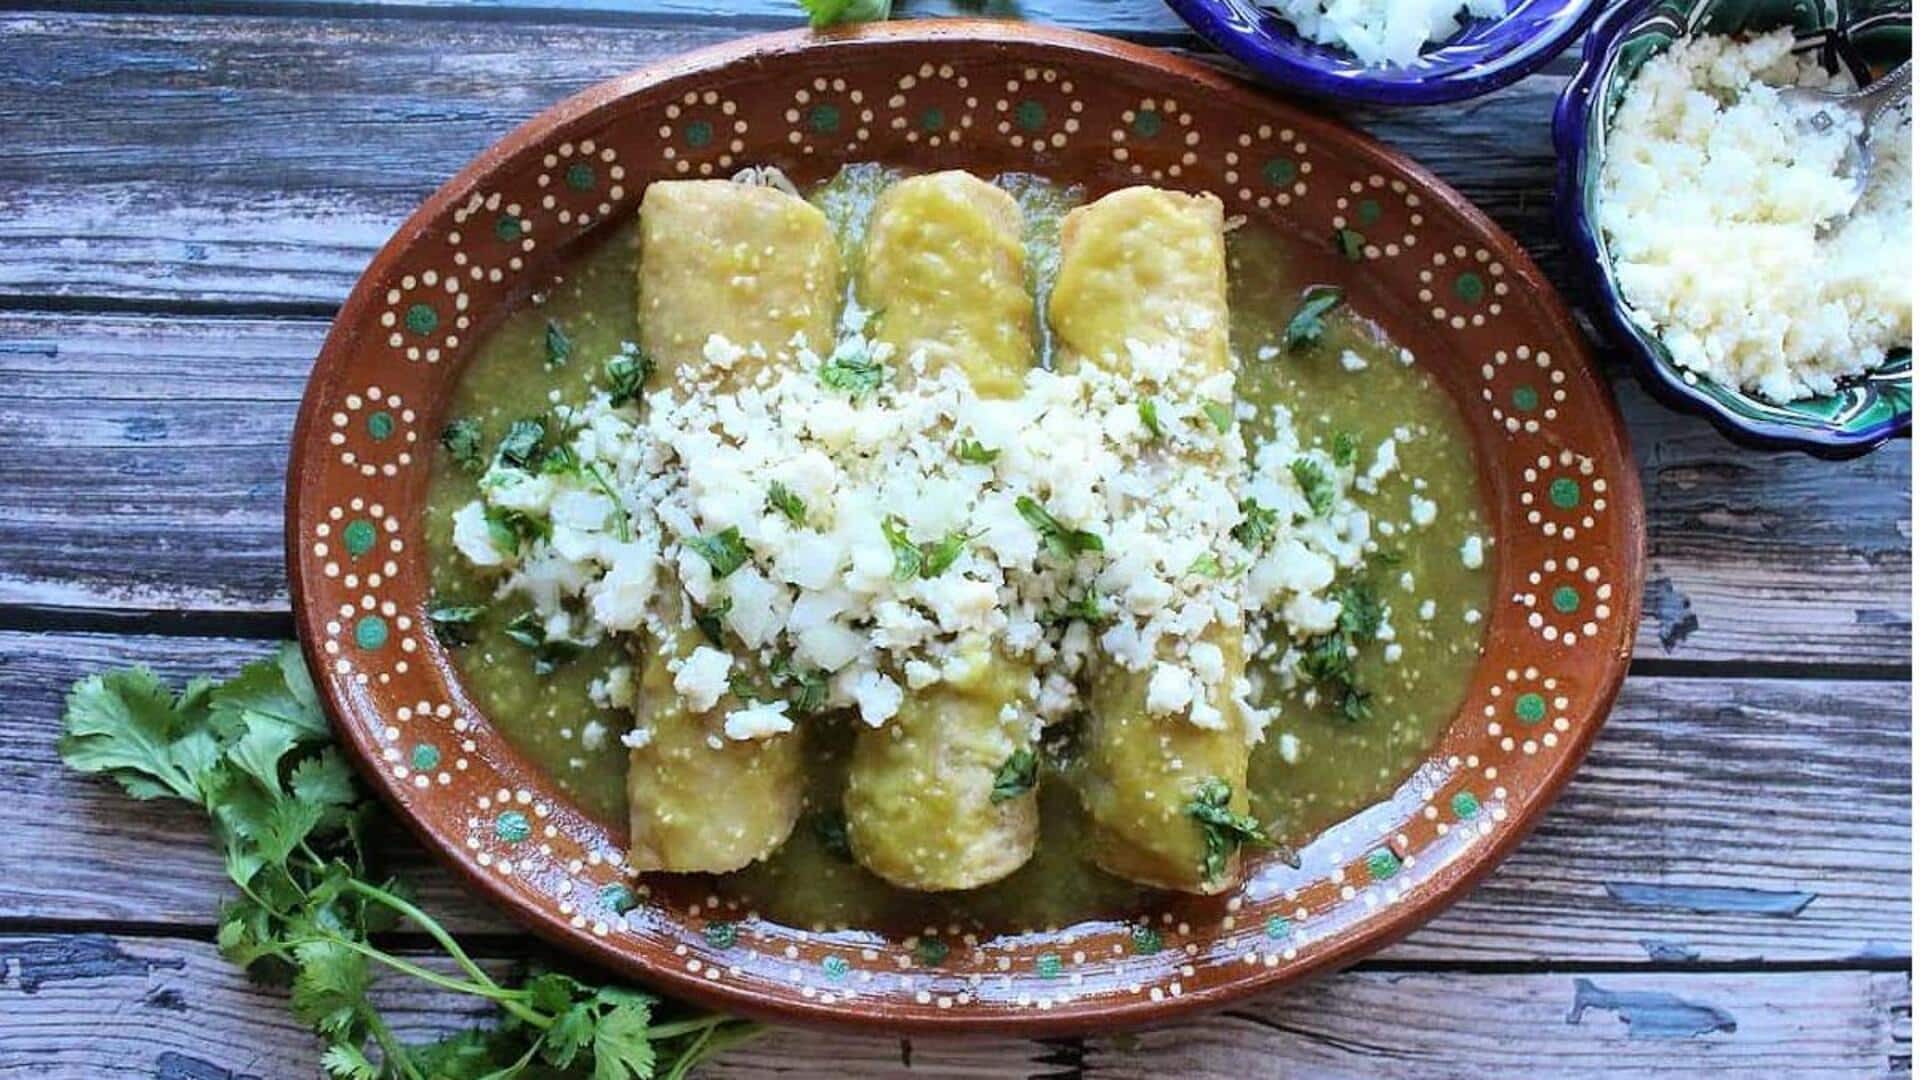 This Mexican enchiladas verdes recipe will impress your guests